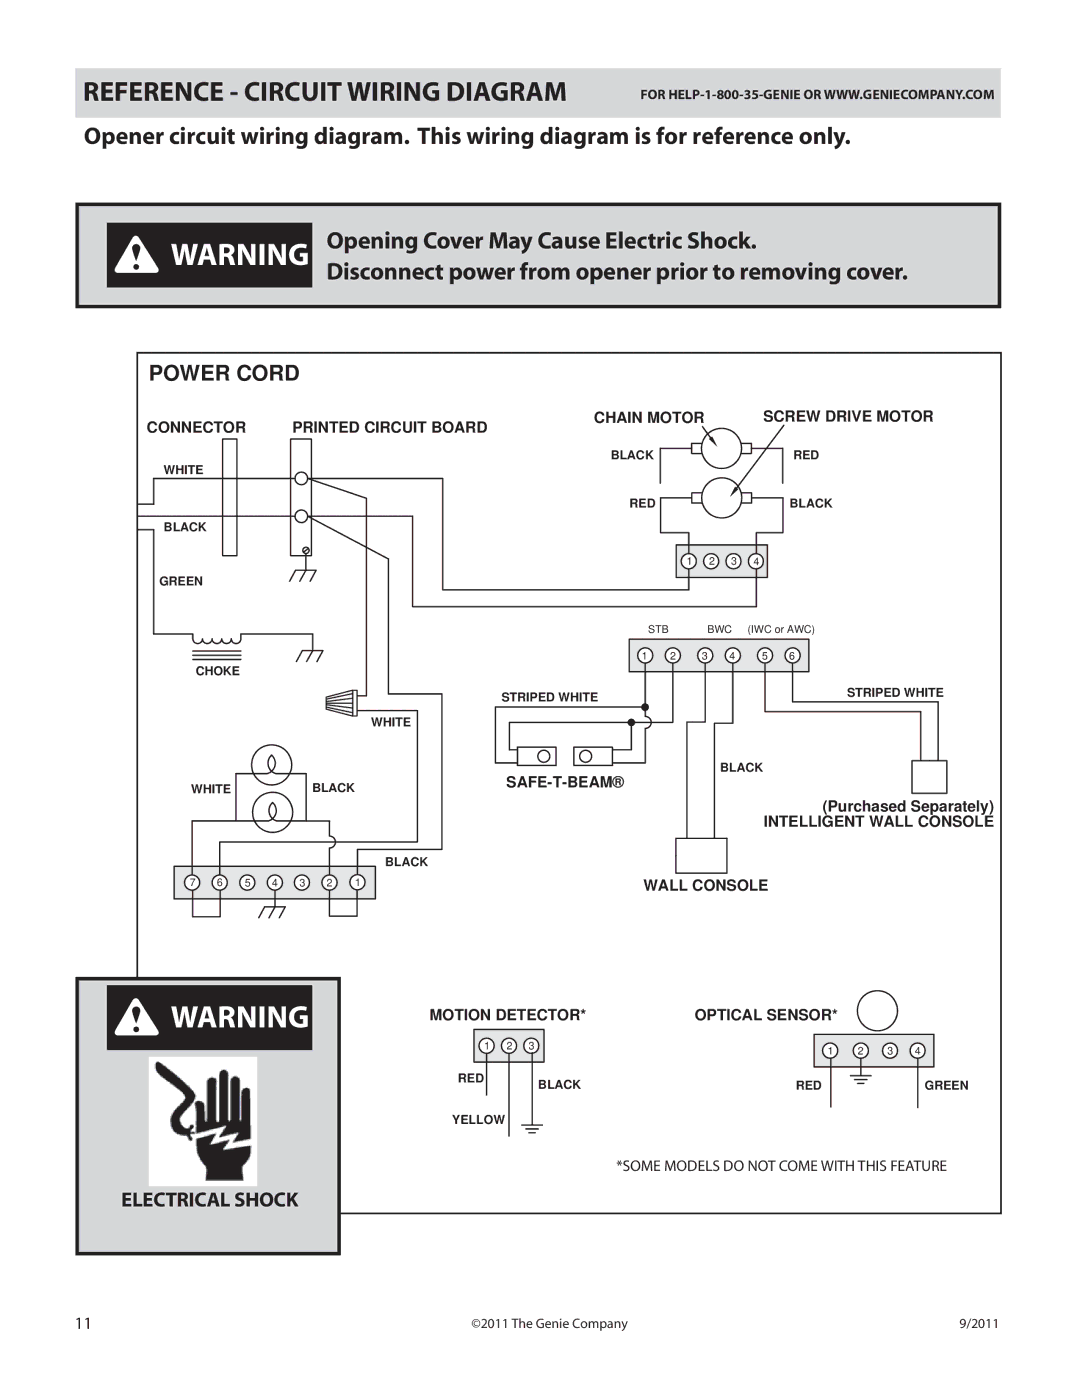 Genie 1000 manual Reference Circuit Wiring Diagram, Power Cord 